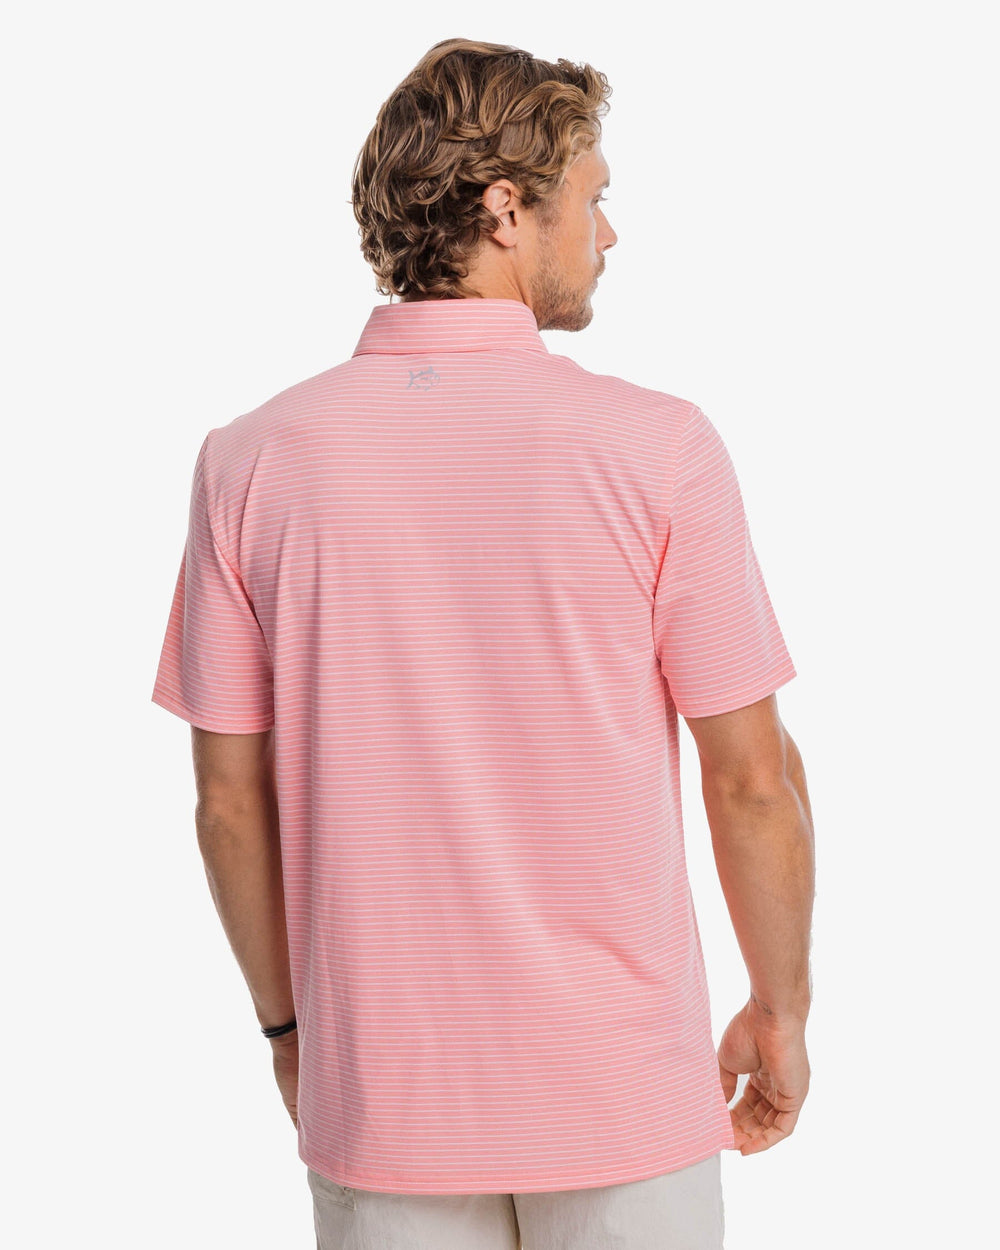 The back view of the Southern Tide Driver Mayfair Performance Polo Shirt by Southern Tide - Flamingo Pink